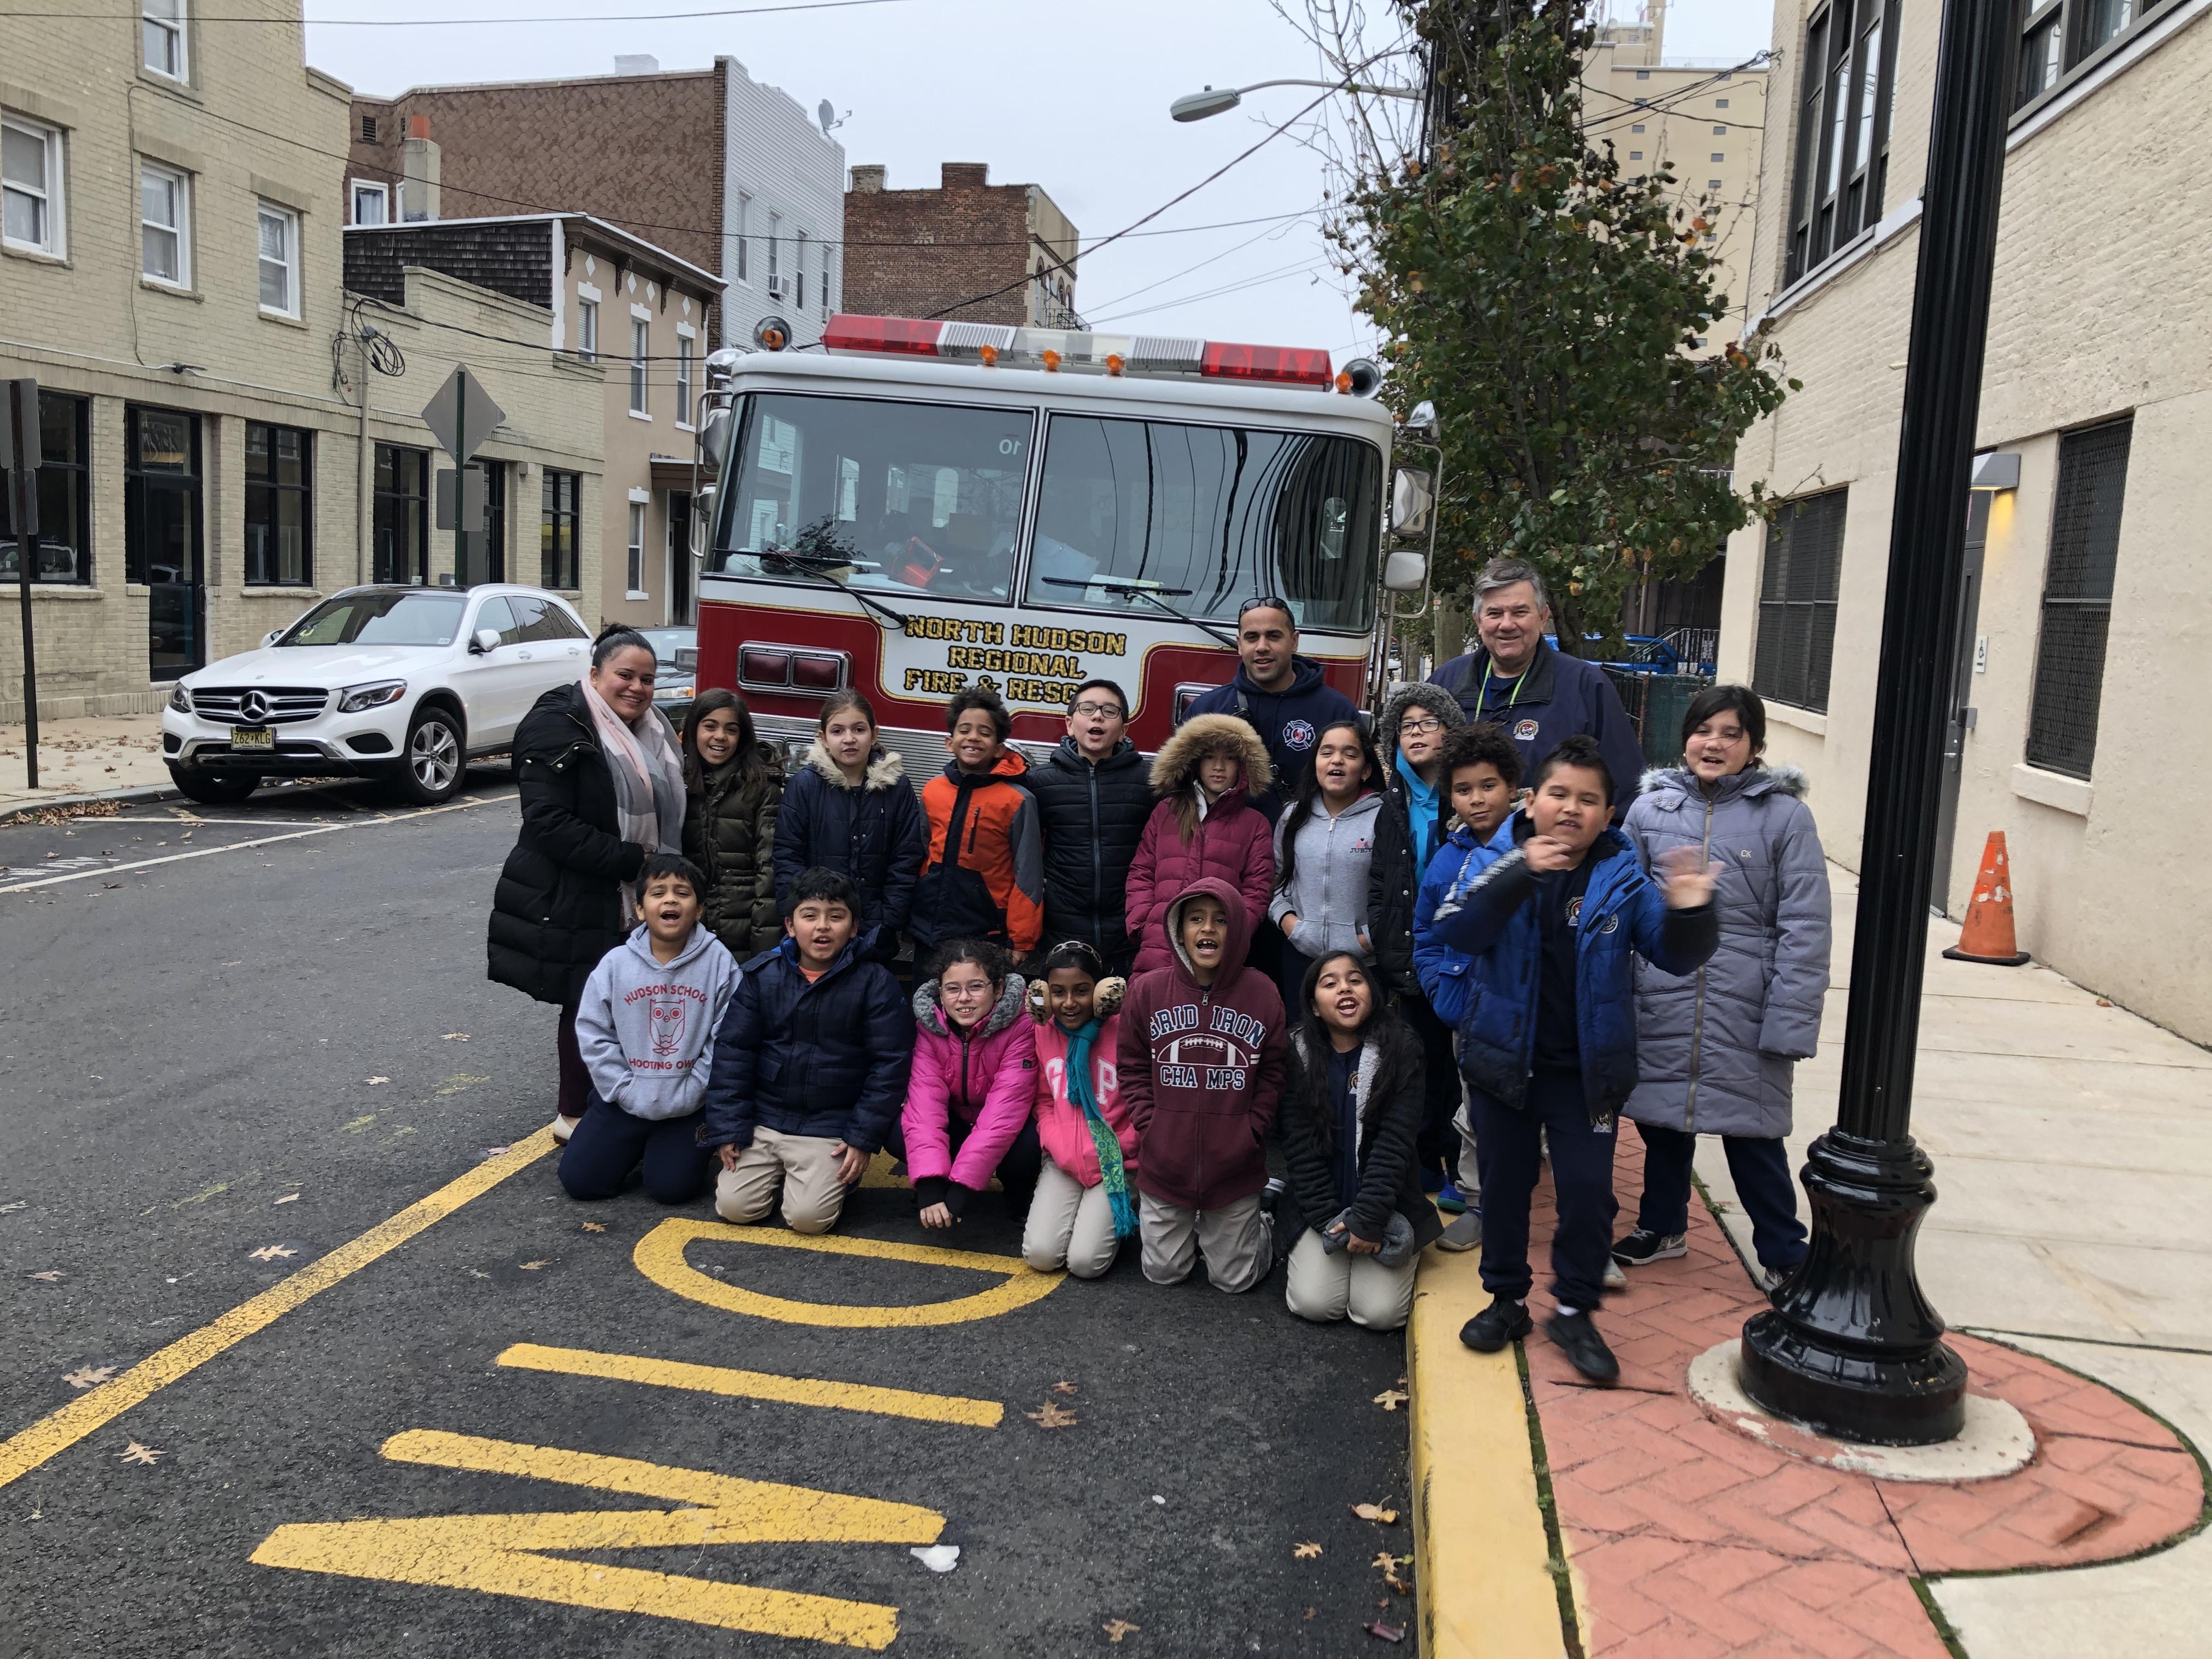 North Hudson Firefighter with a another class of students and their teacher in front of the fire engine in the front of the school